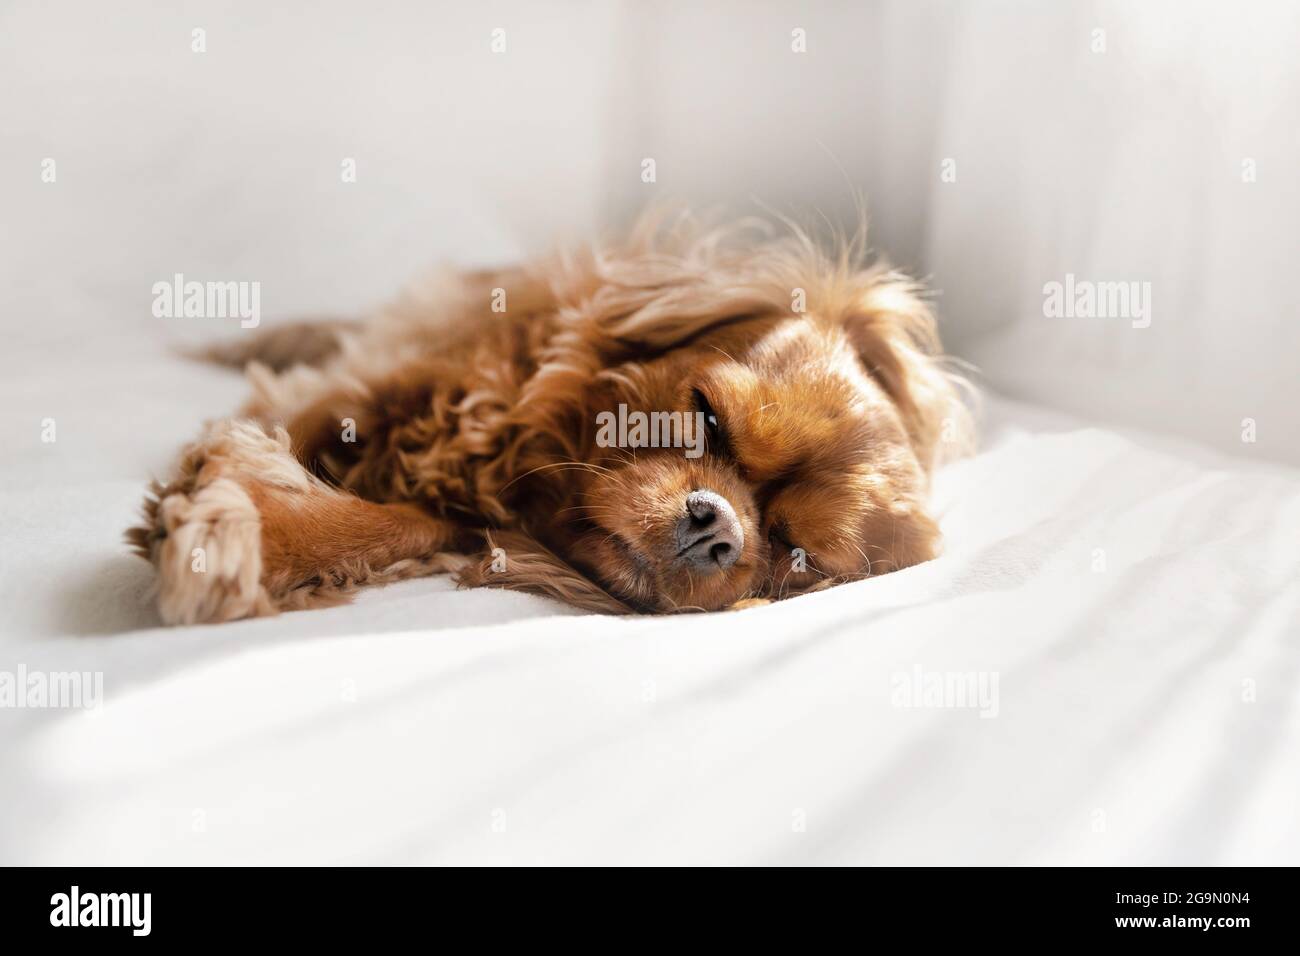 Cute dog napping in the bedroom Stock Photo